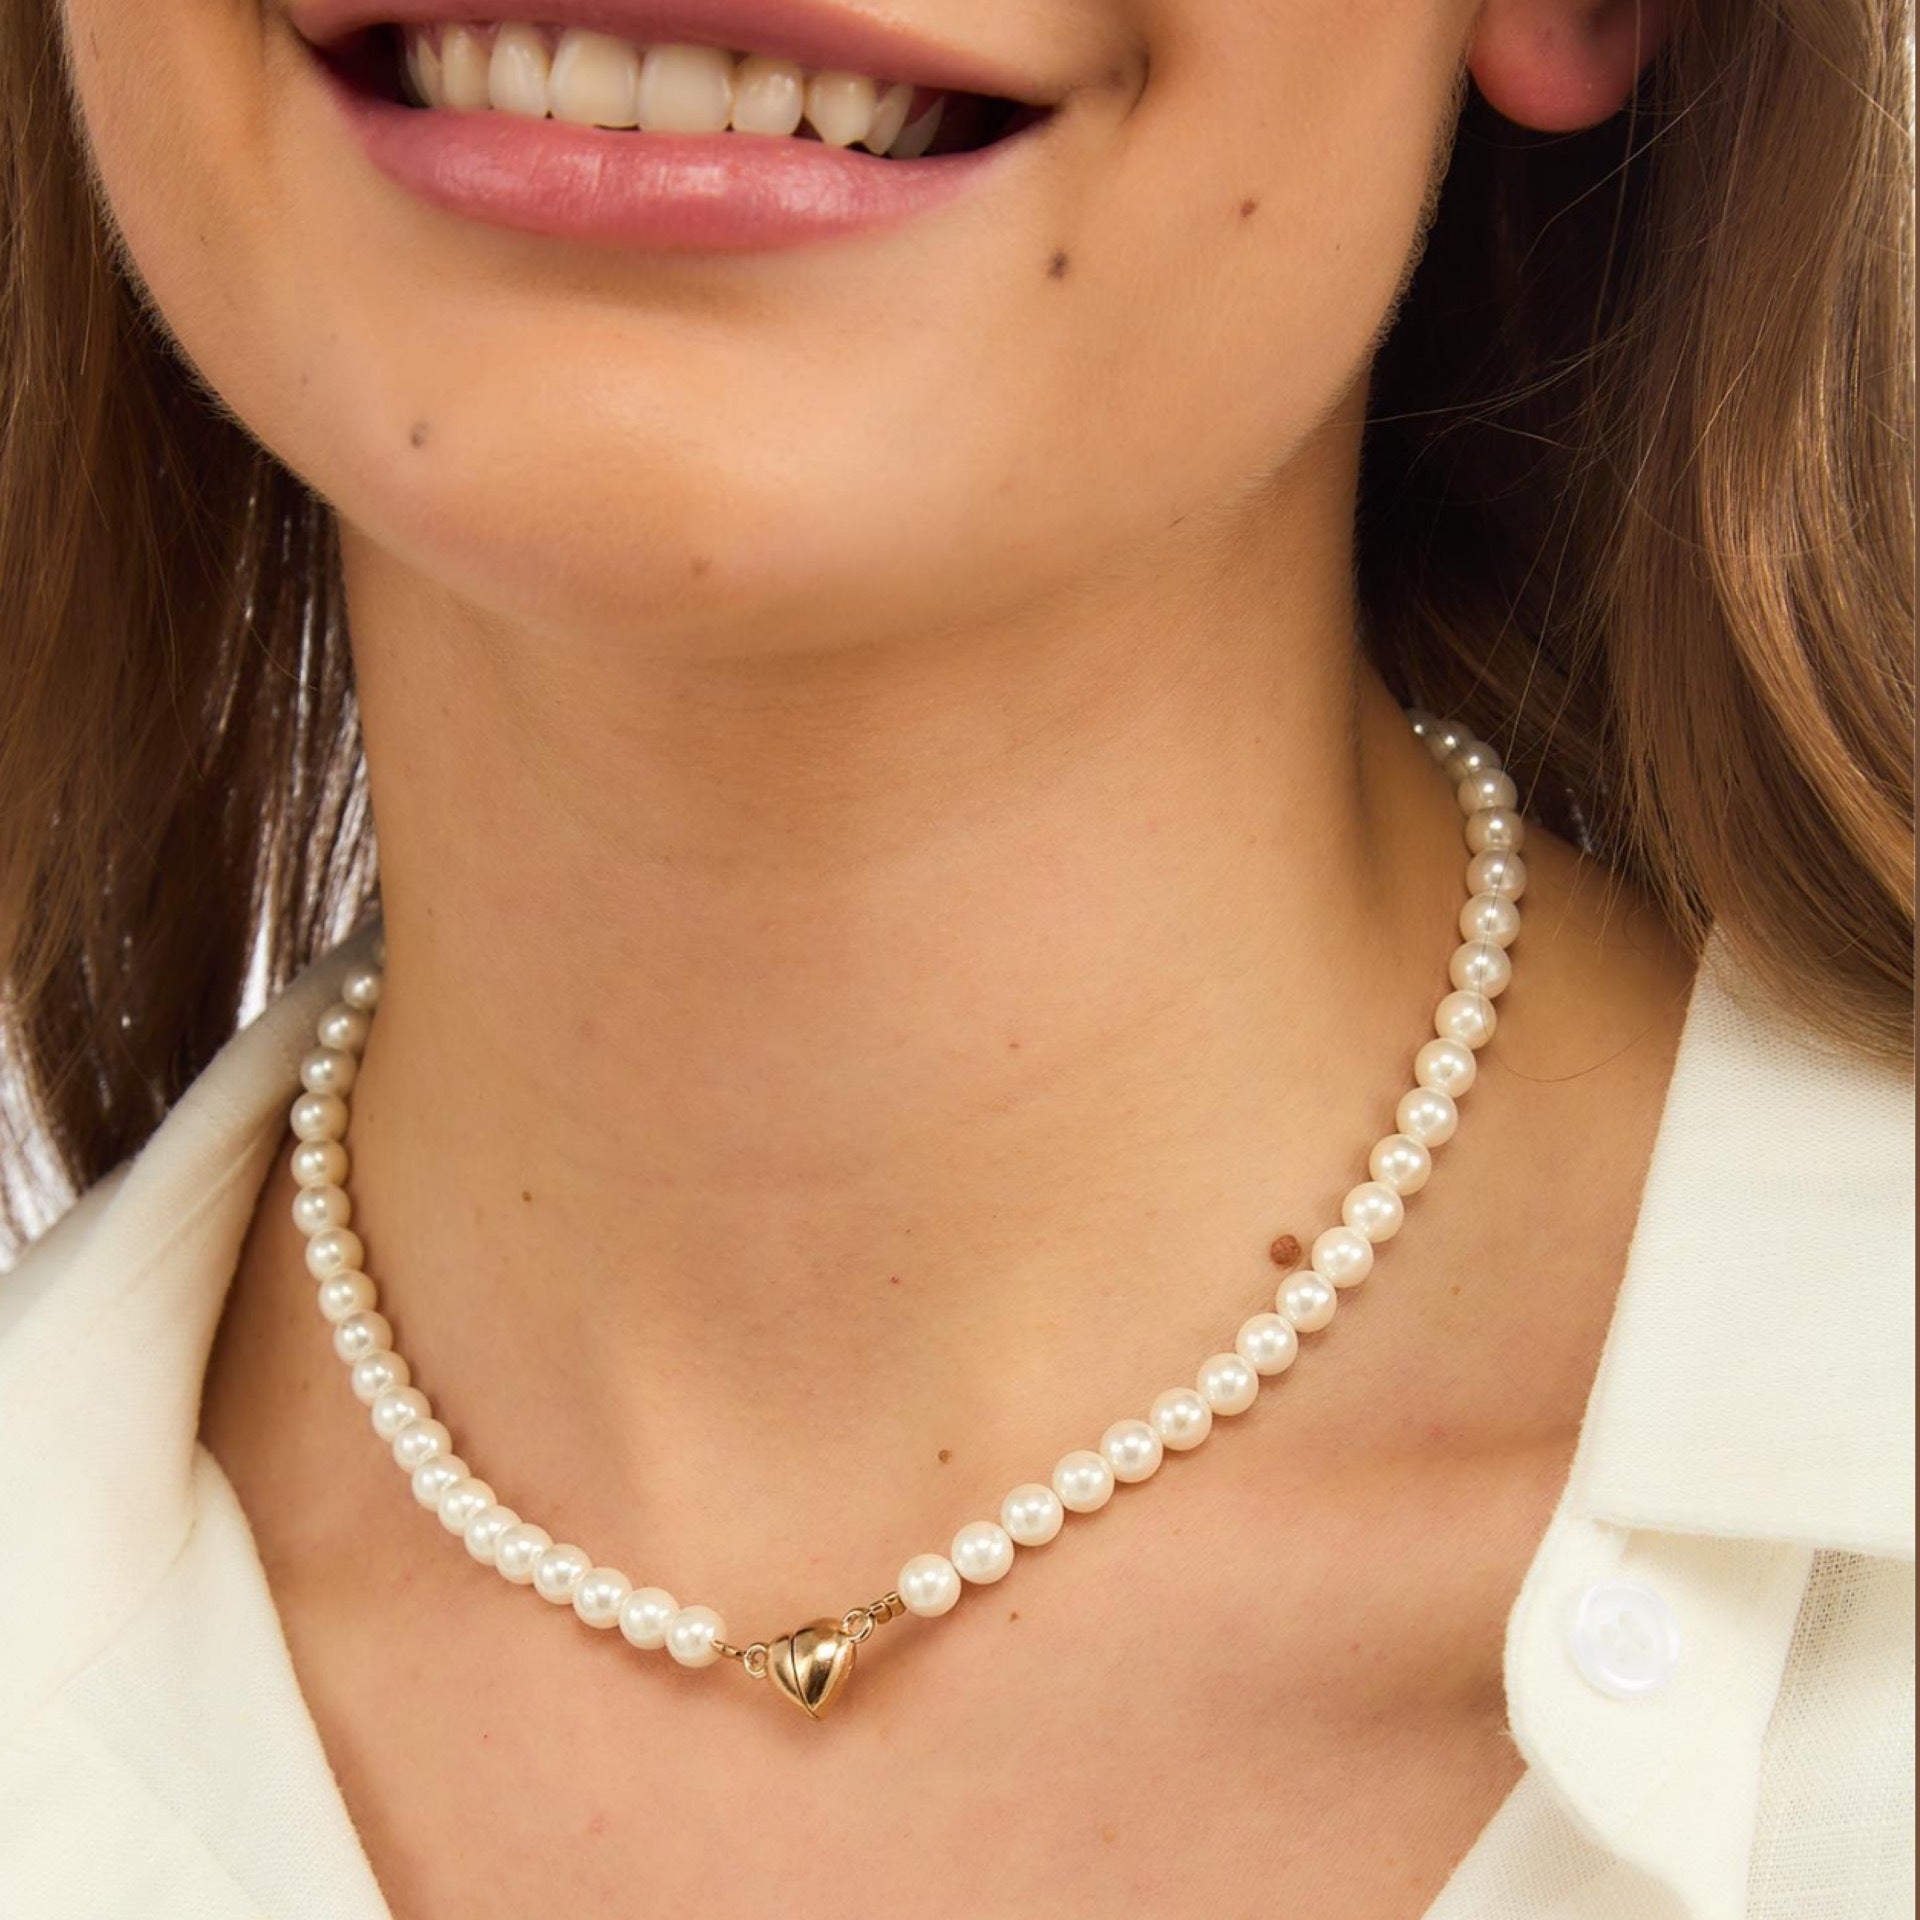 Womens Layered Beaded Chain Necklace With Big Heart Pearl Choker With  Pendant Imitation Pearl And Stone Bangle Accessories From Fashion12358,  $6.12 | DHgate.Com